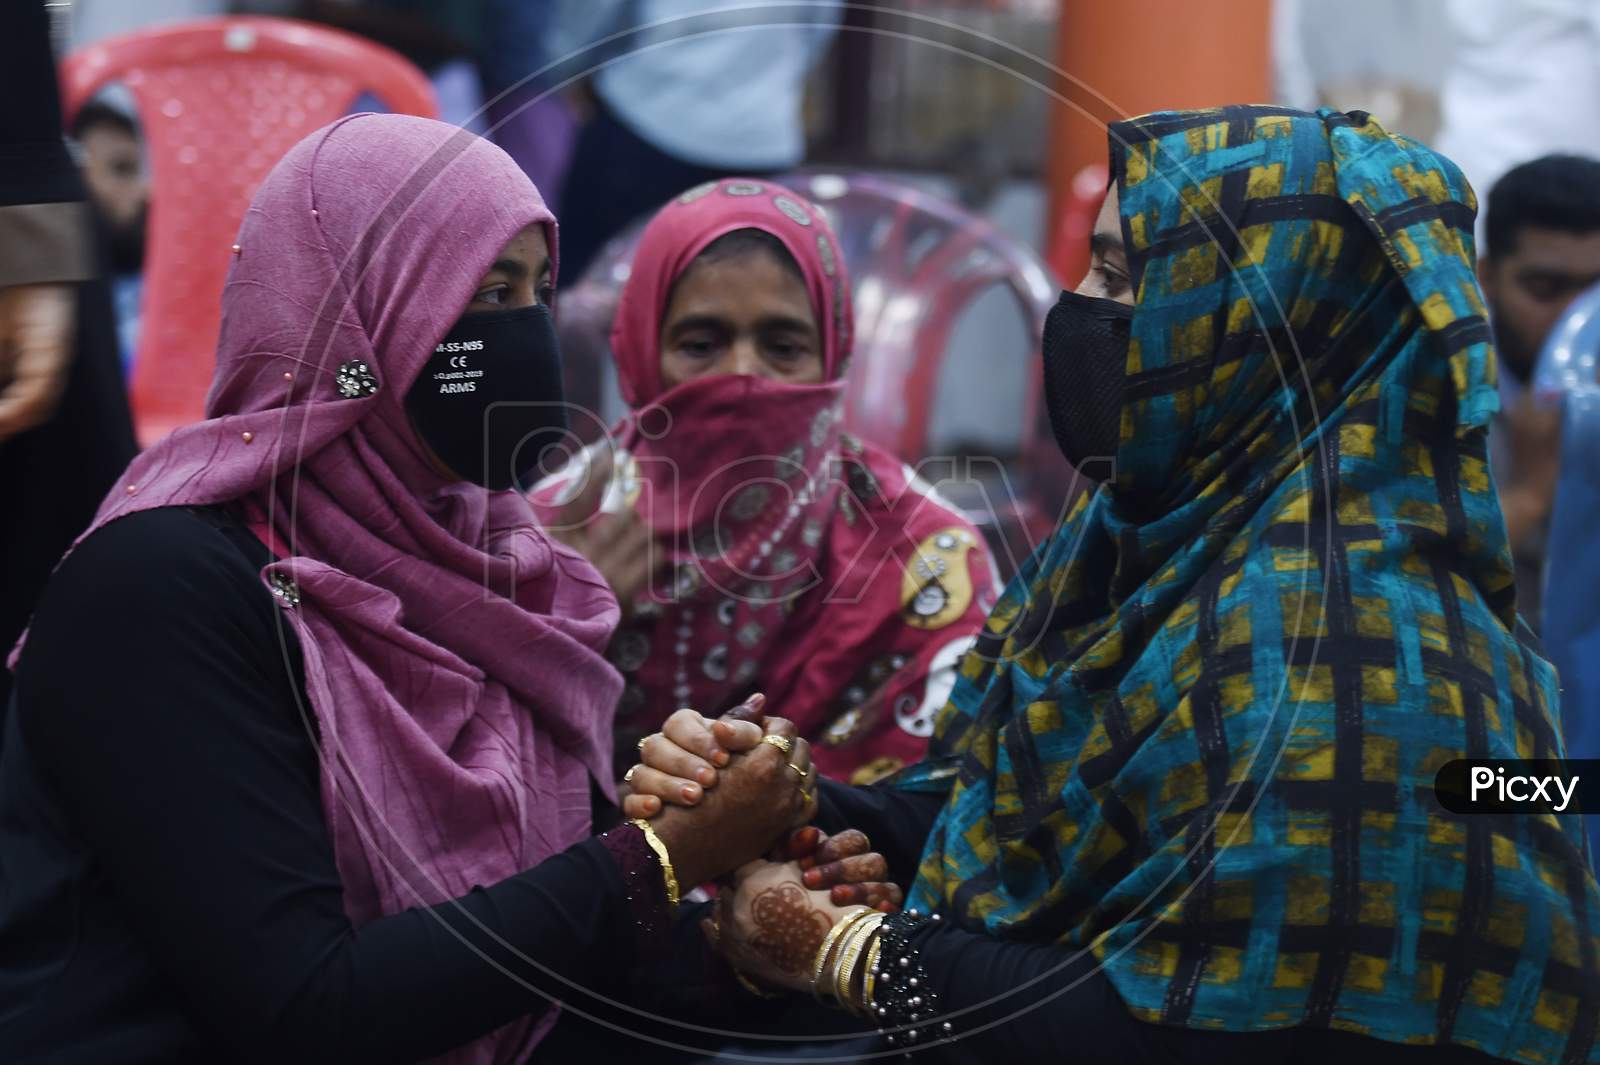 Muslims greet each other On The Occasion Of Eid Al-Adha,on July 31, 2020 In Chennai